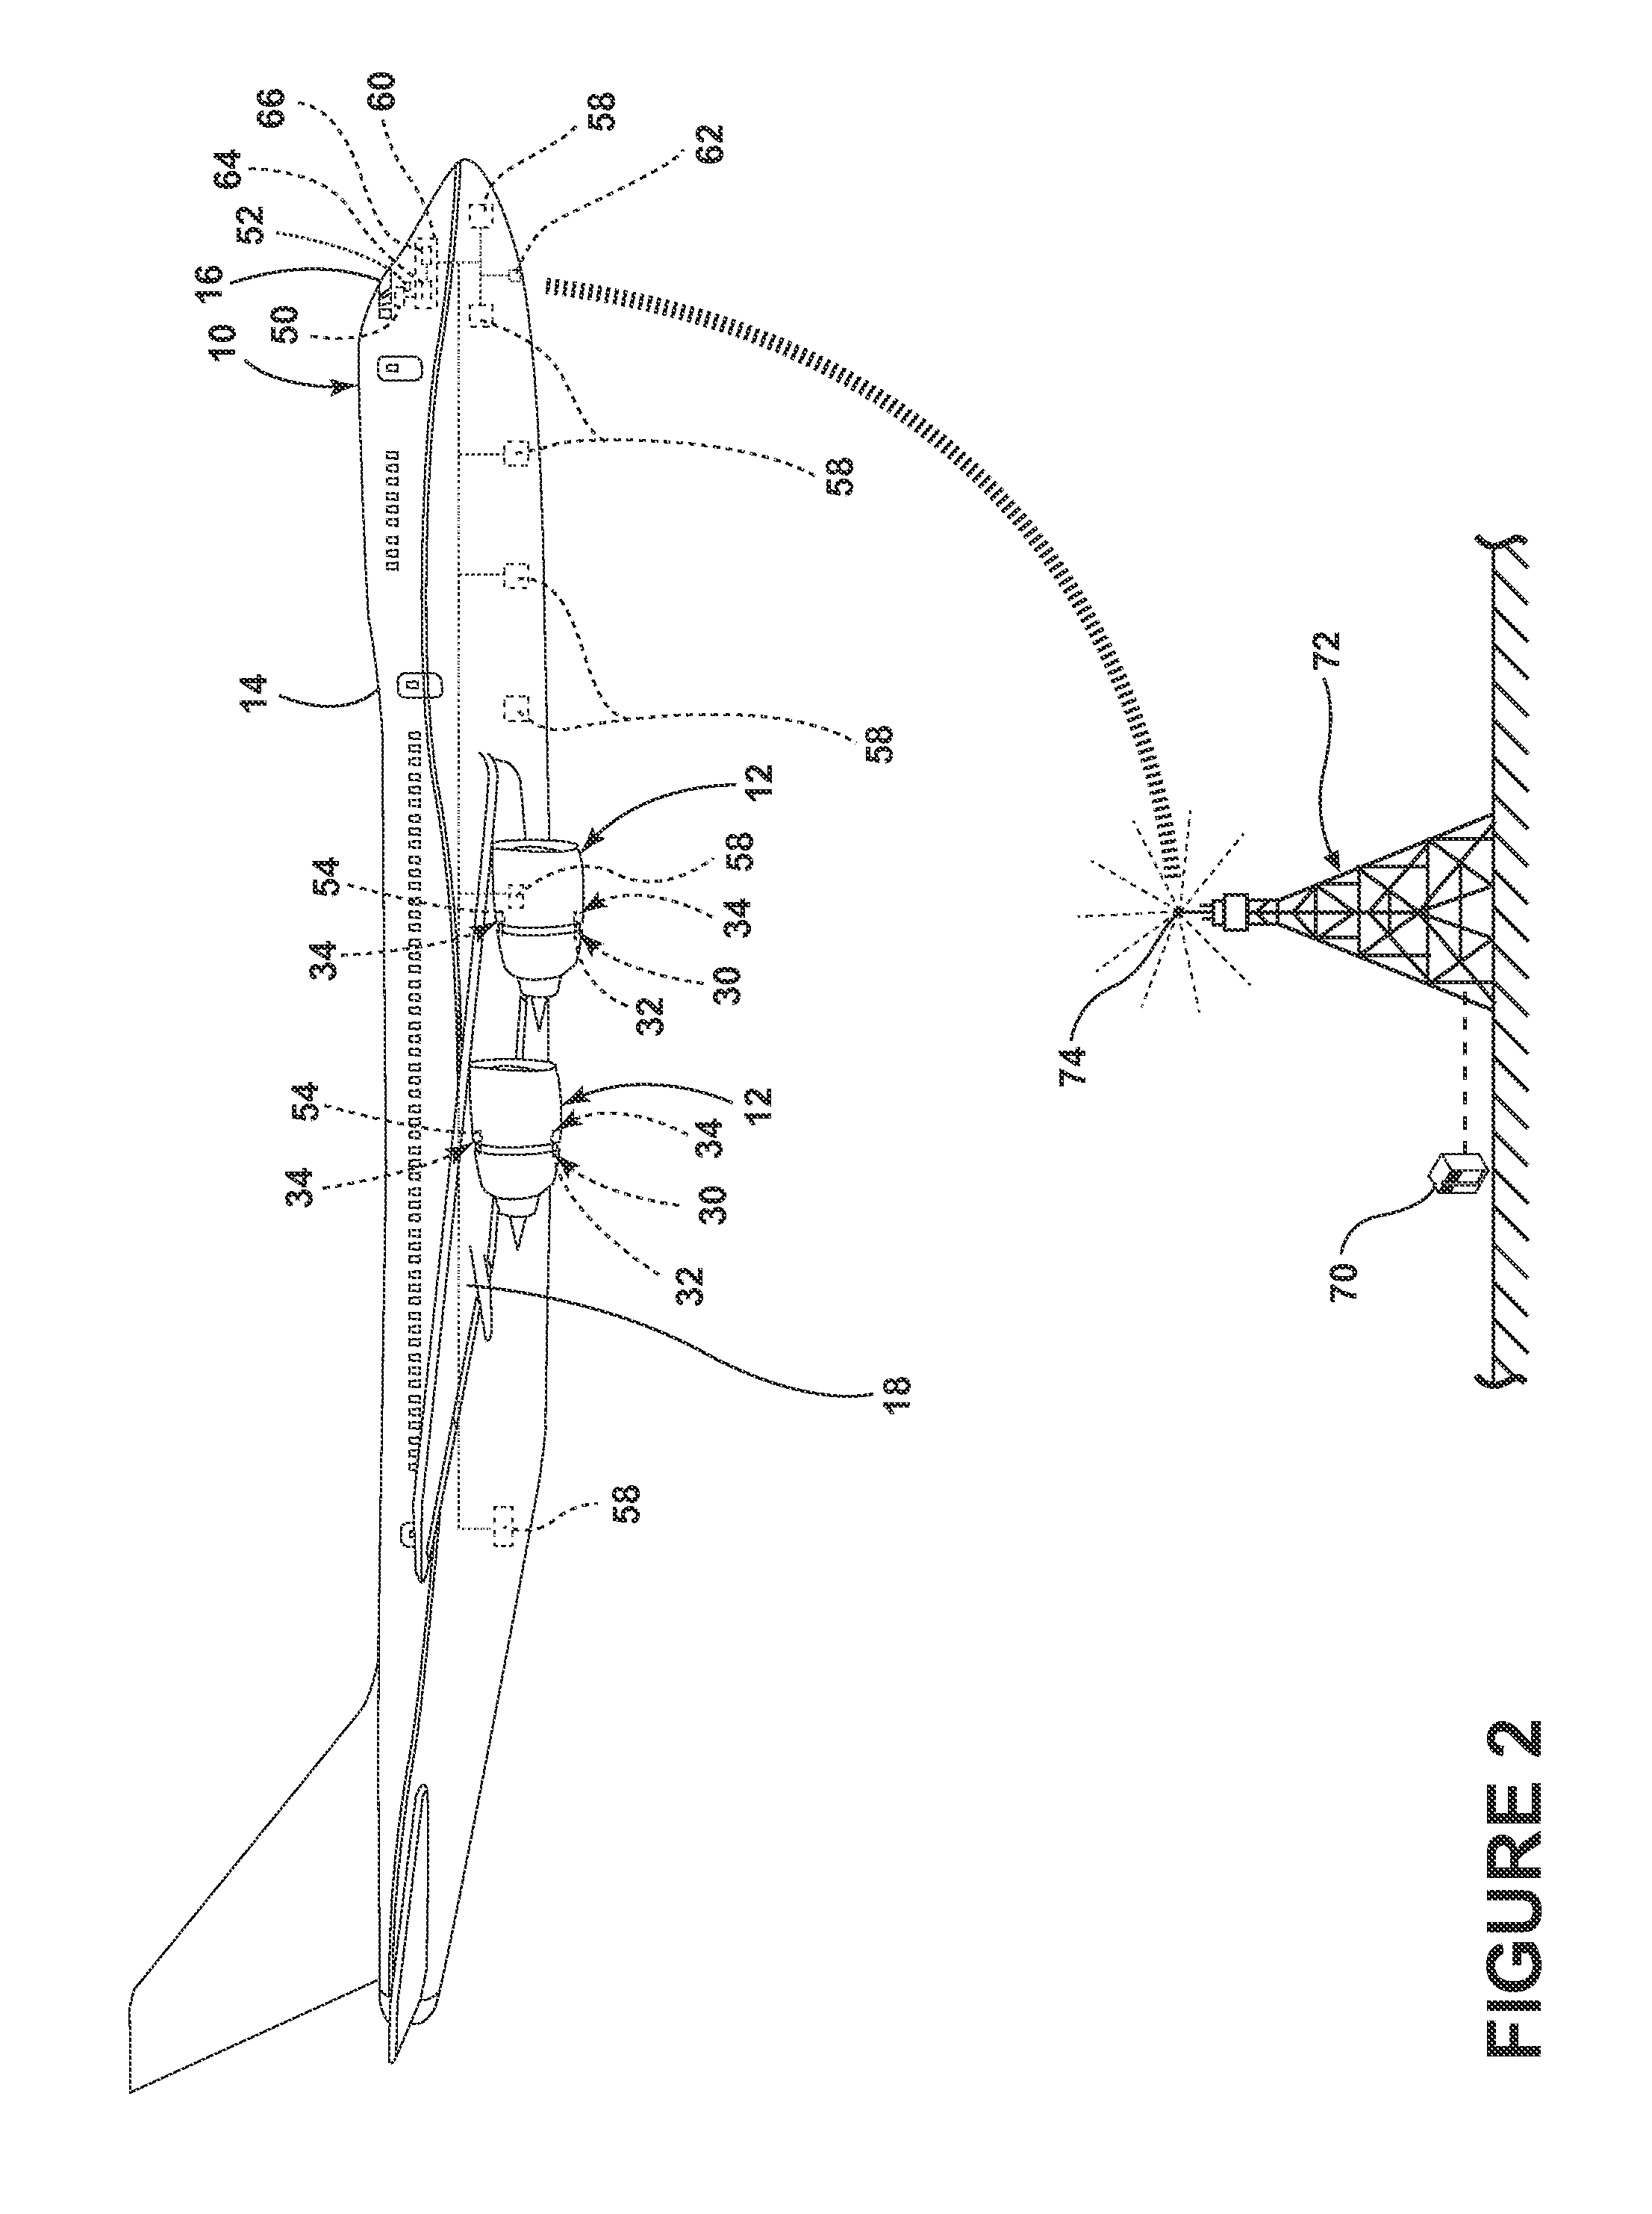 Method for predicting faults in an aircraft thrust reverser system